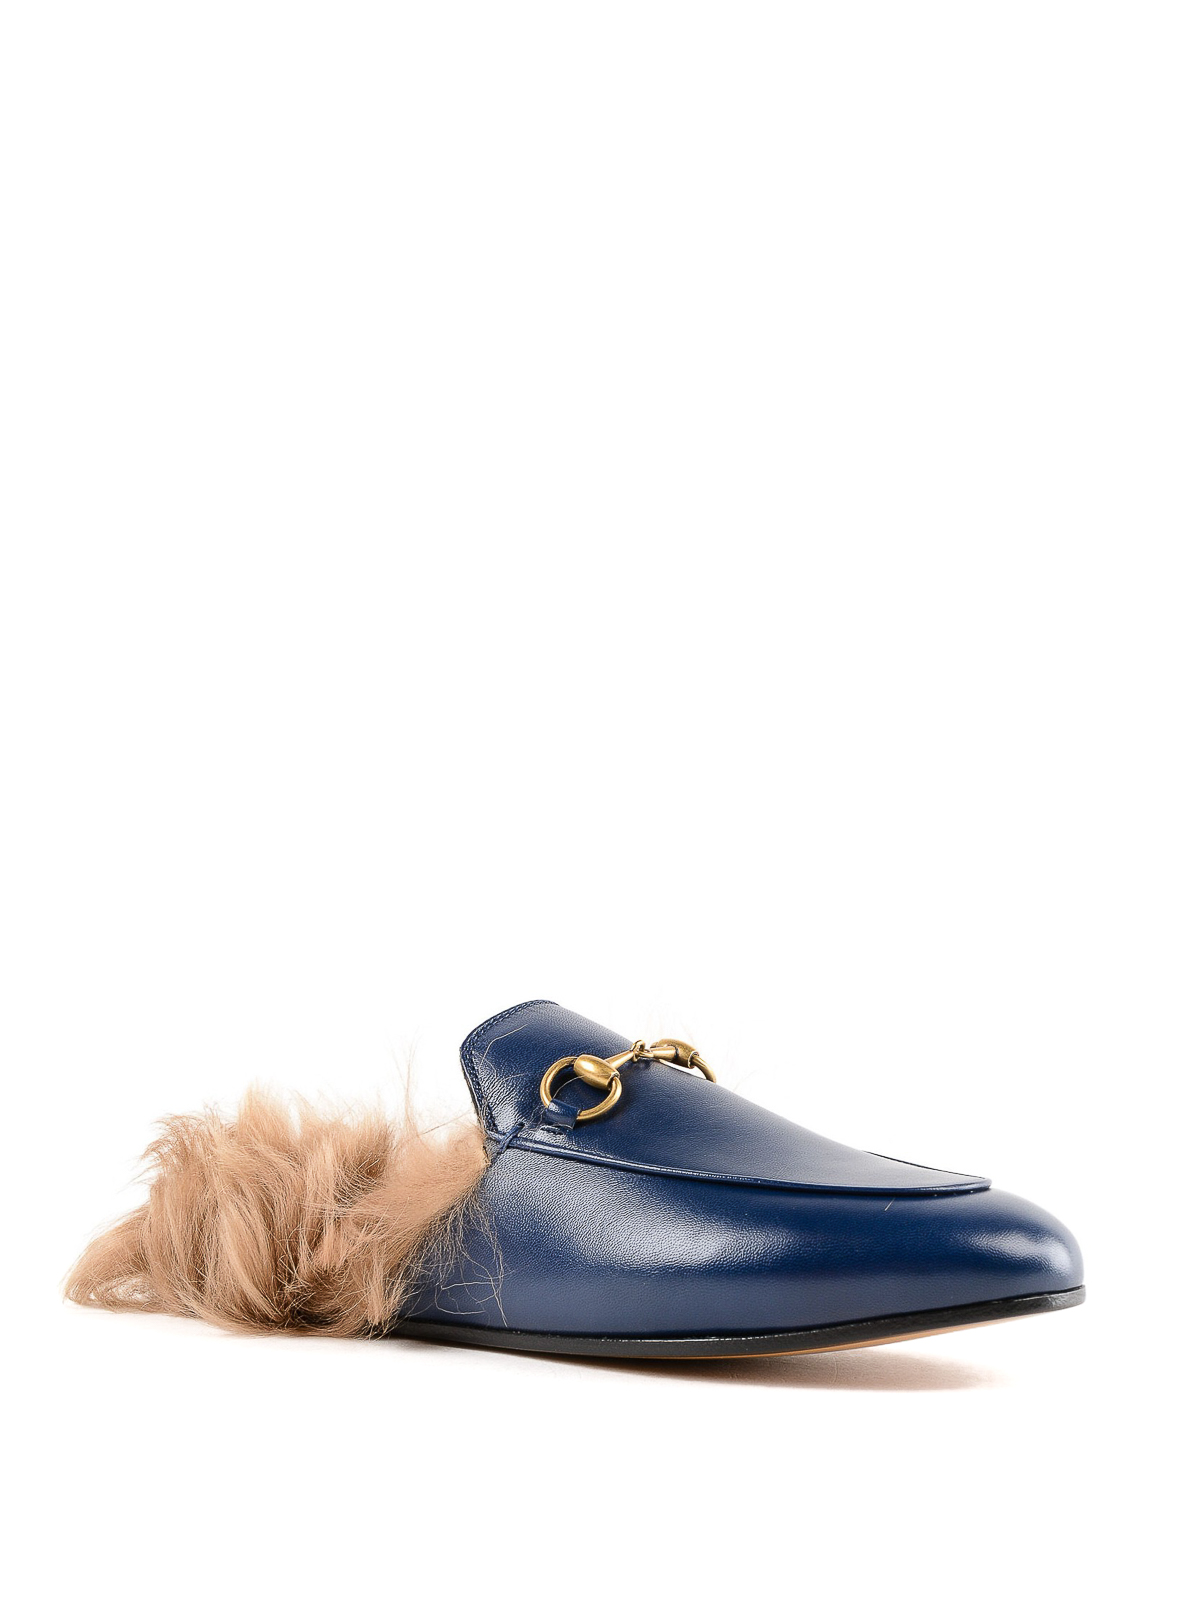 Sanctuary At vise Duftende Loafers & Slippers Gucci - Princetown fur trim blue leather slippers -  426361DMB904174